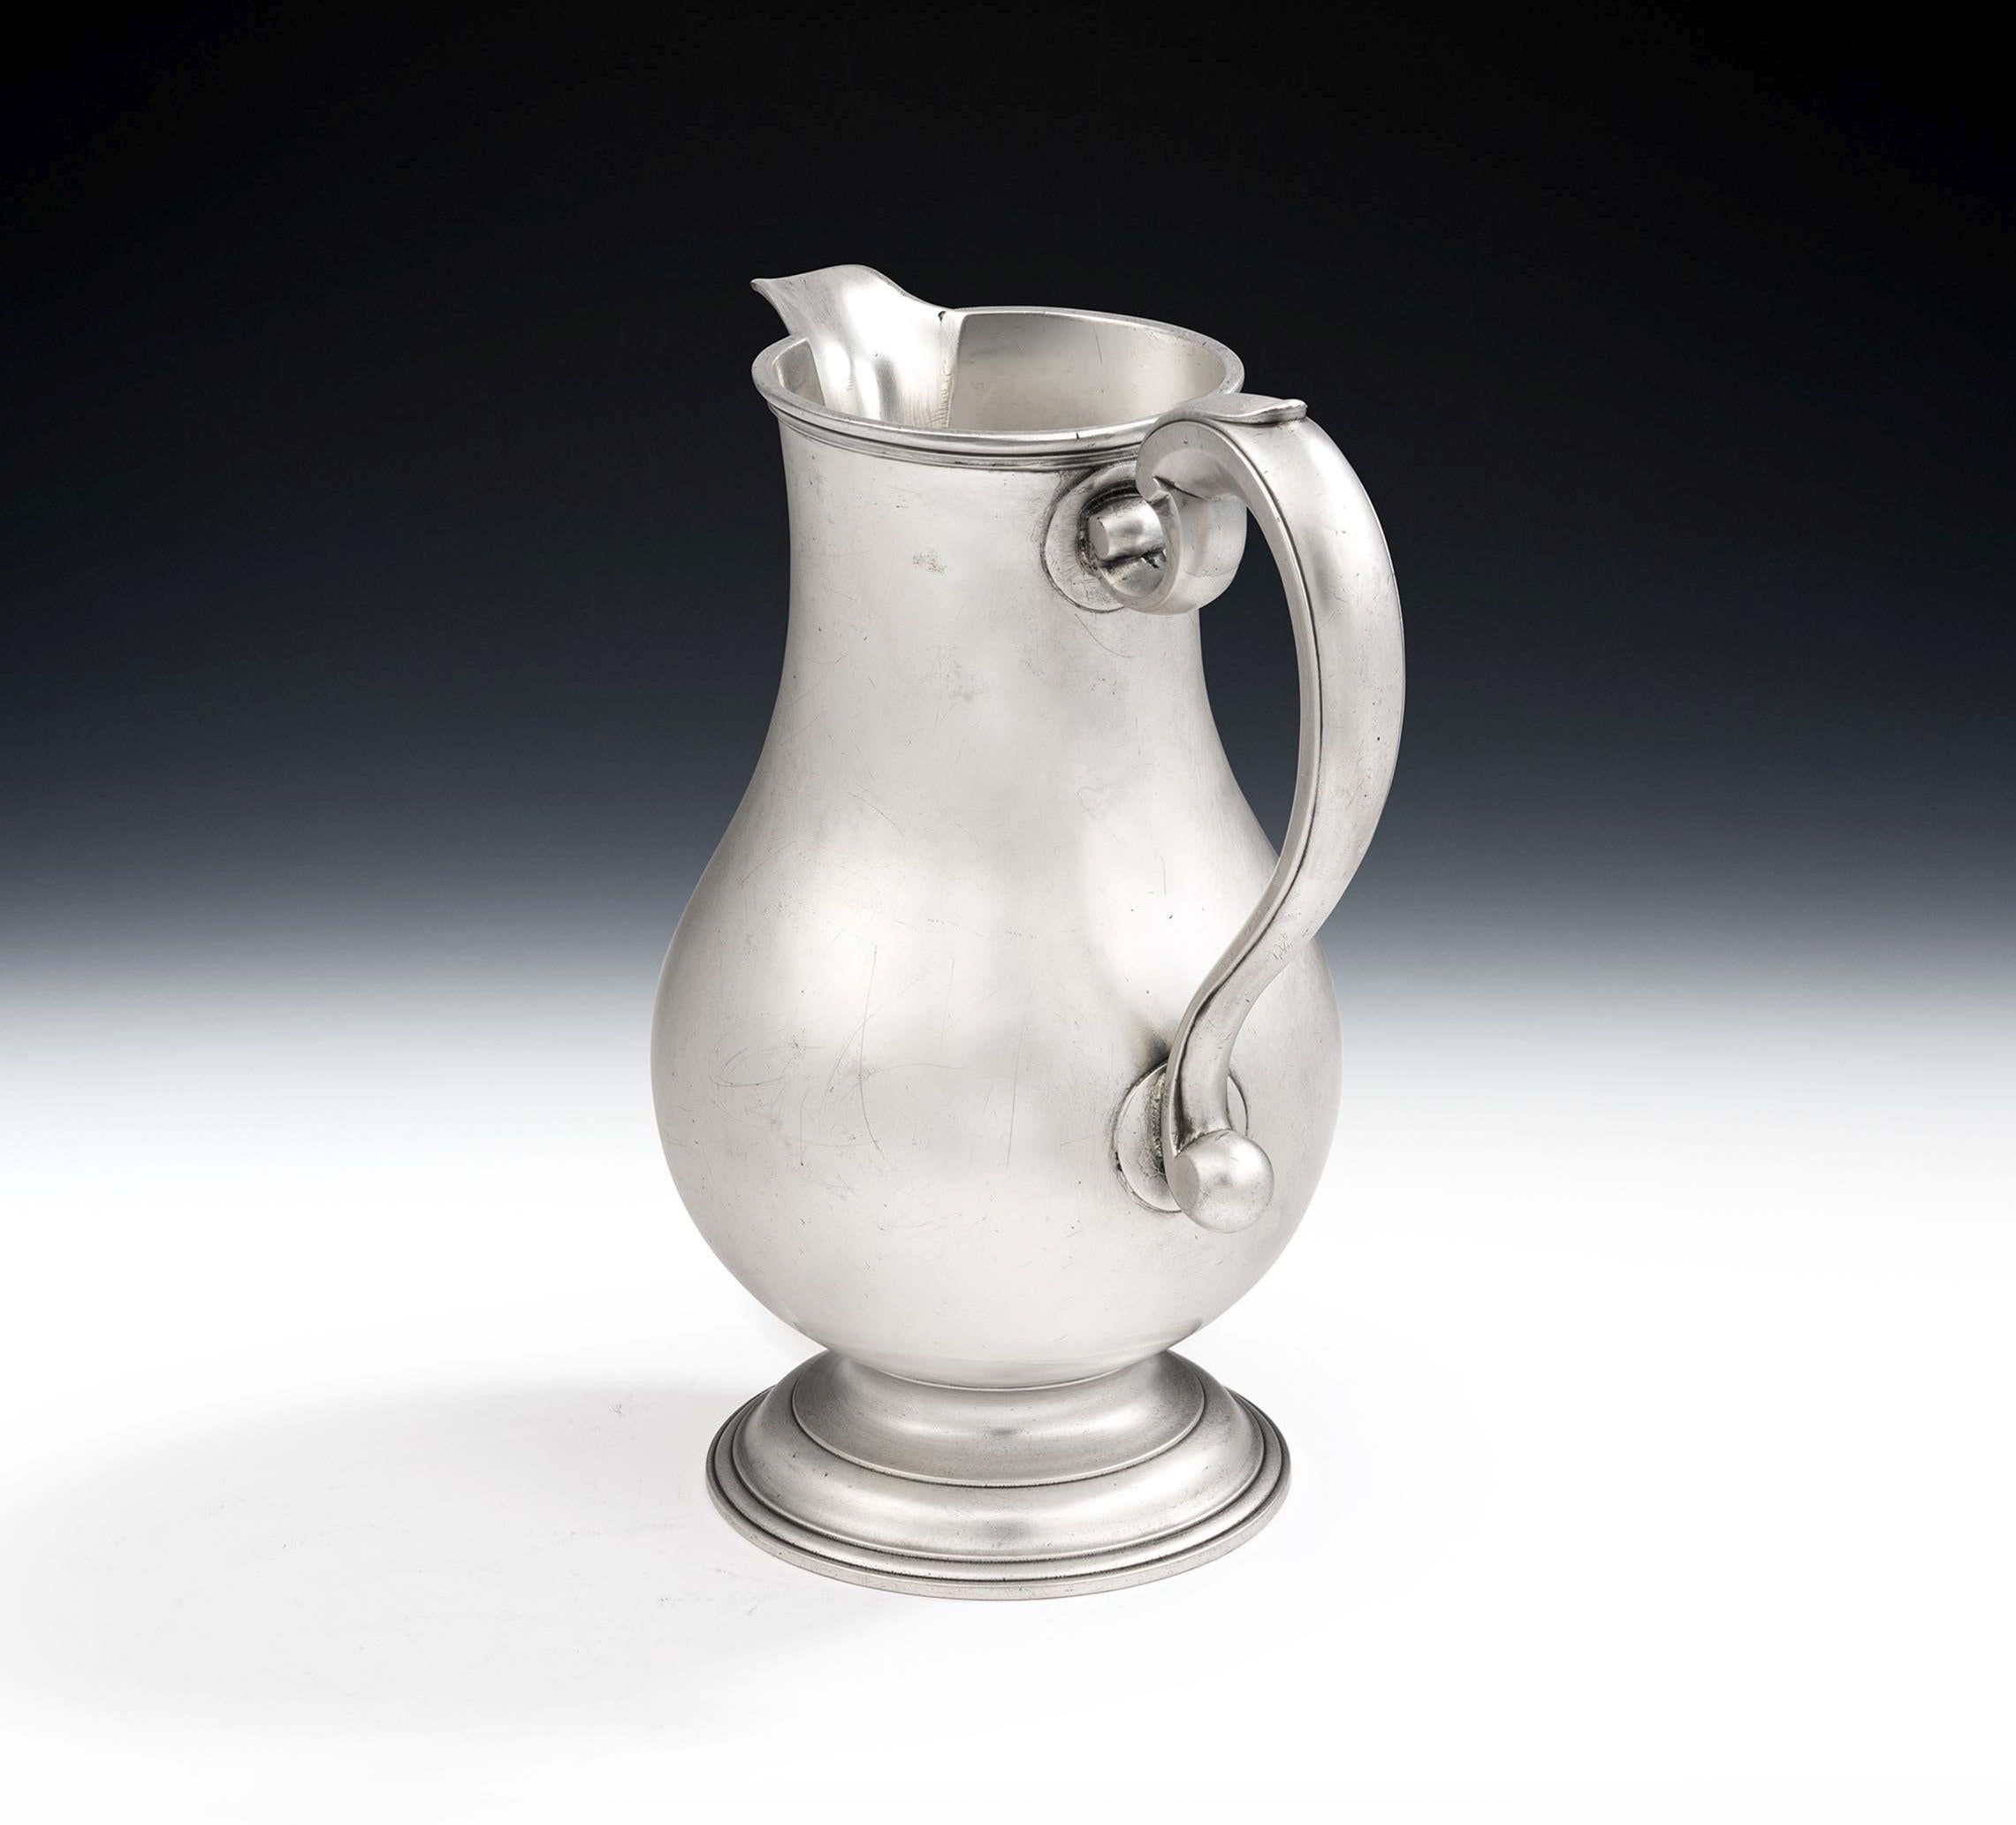 An Extremely Fine George II Beer Jug Made in London in 1750 by Thomas Whipham I.

The Jug stands on a cast and applied stepped circular foot which is decorated with reeding.  The pear shaped main body rises to a slender neck which is also decorated